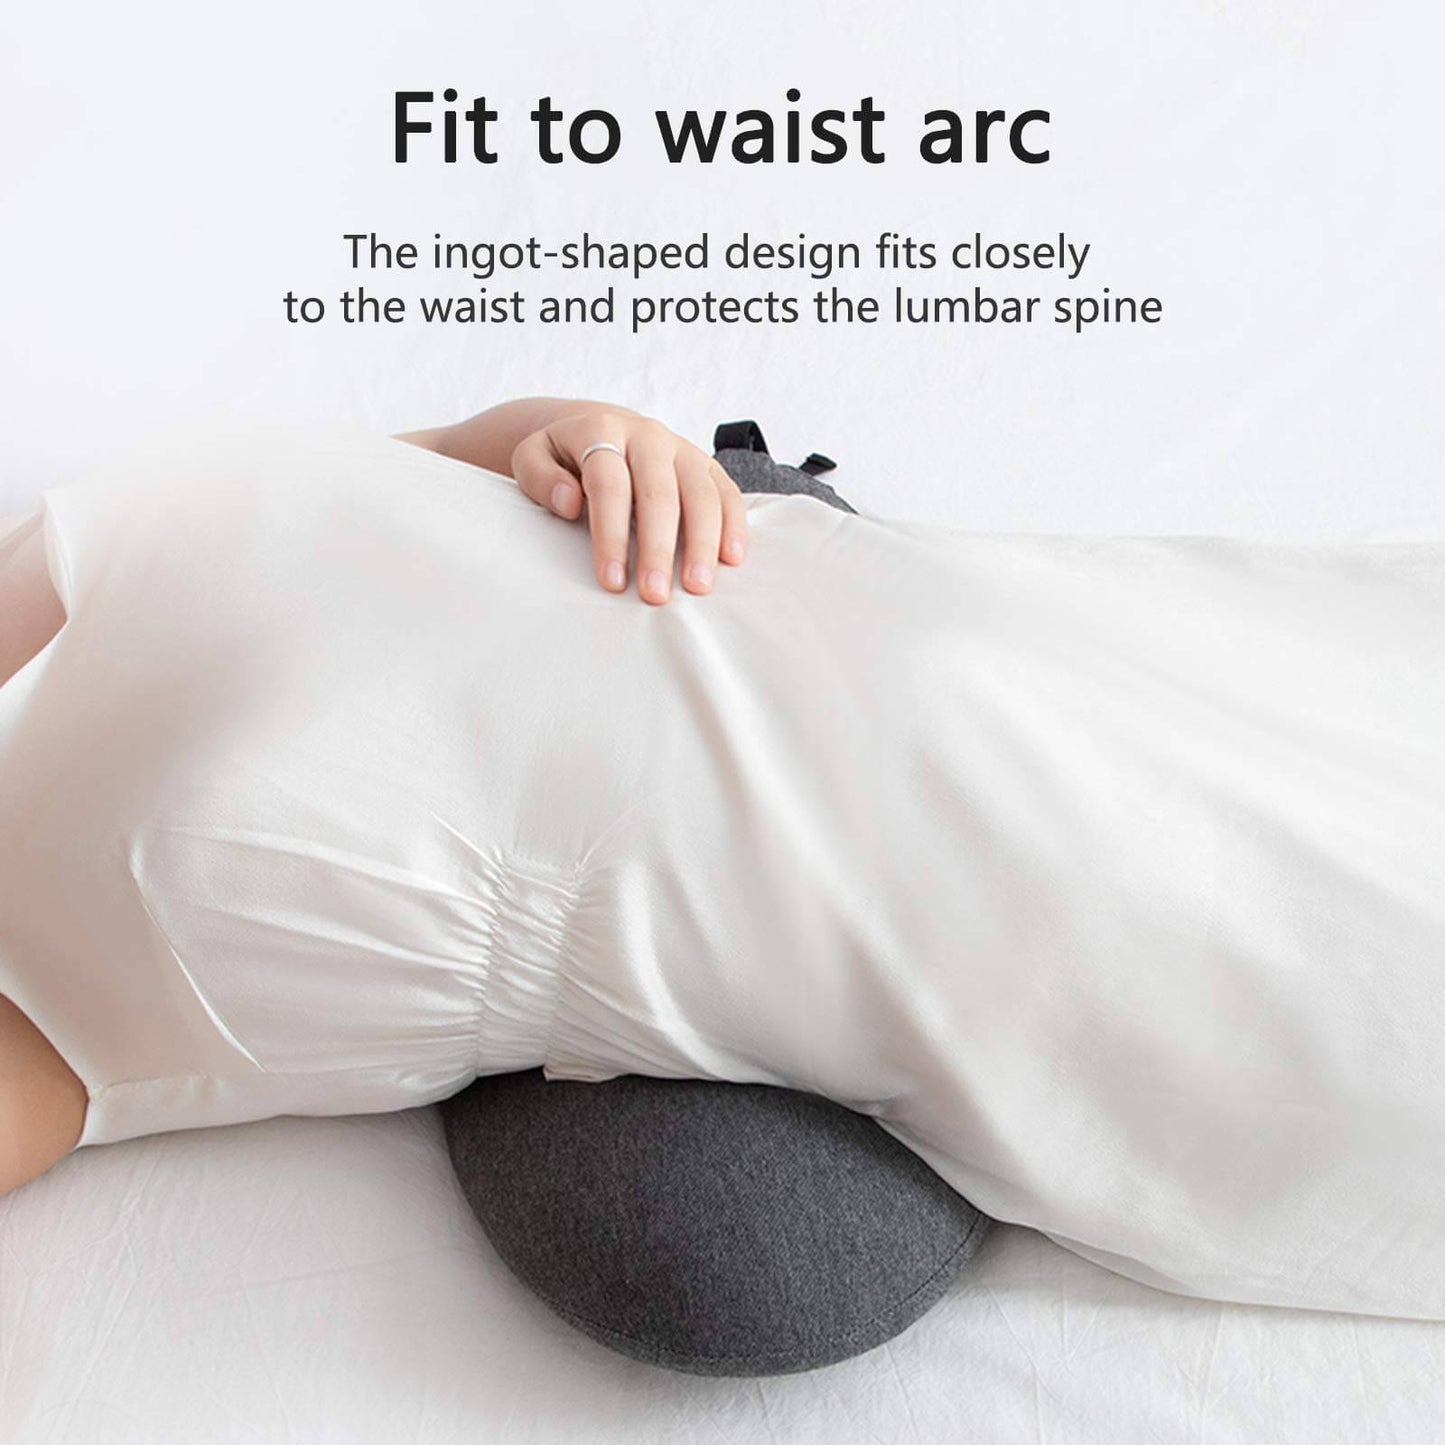 BBL Pillow for Sleeping, Driving Cars/Plane, After Surgery on Recovery, arc of waist